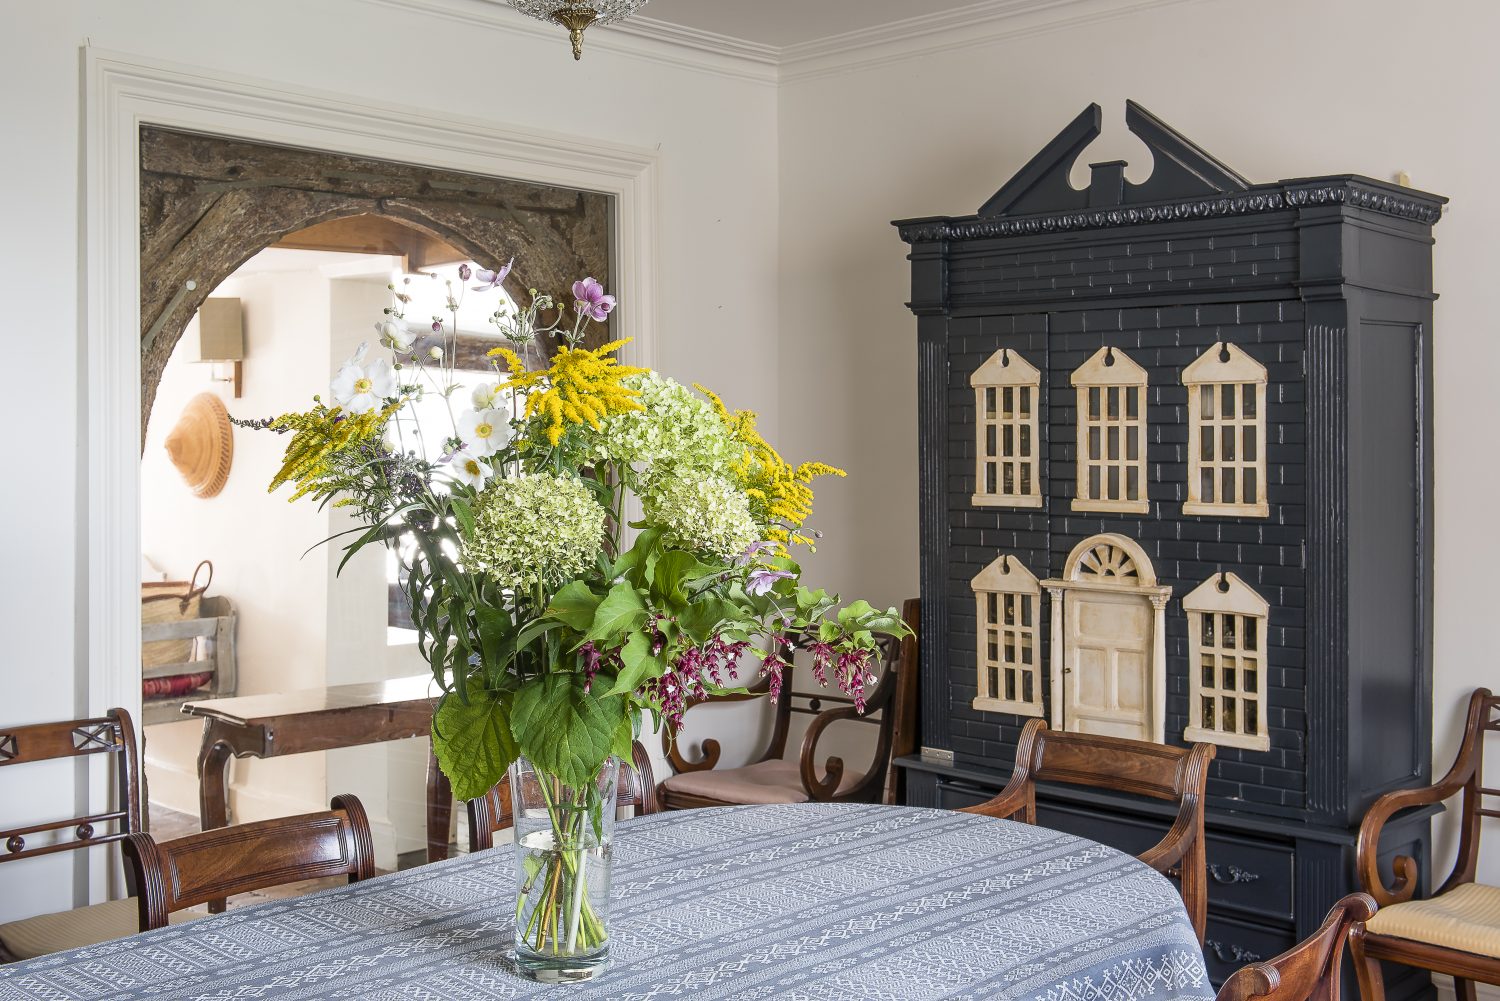 Julia bought the doll's house in an antique shop and painted it in Farrow & Ball Railings